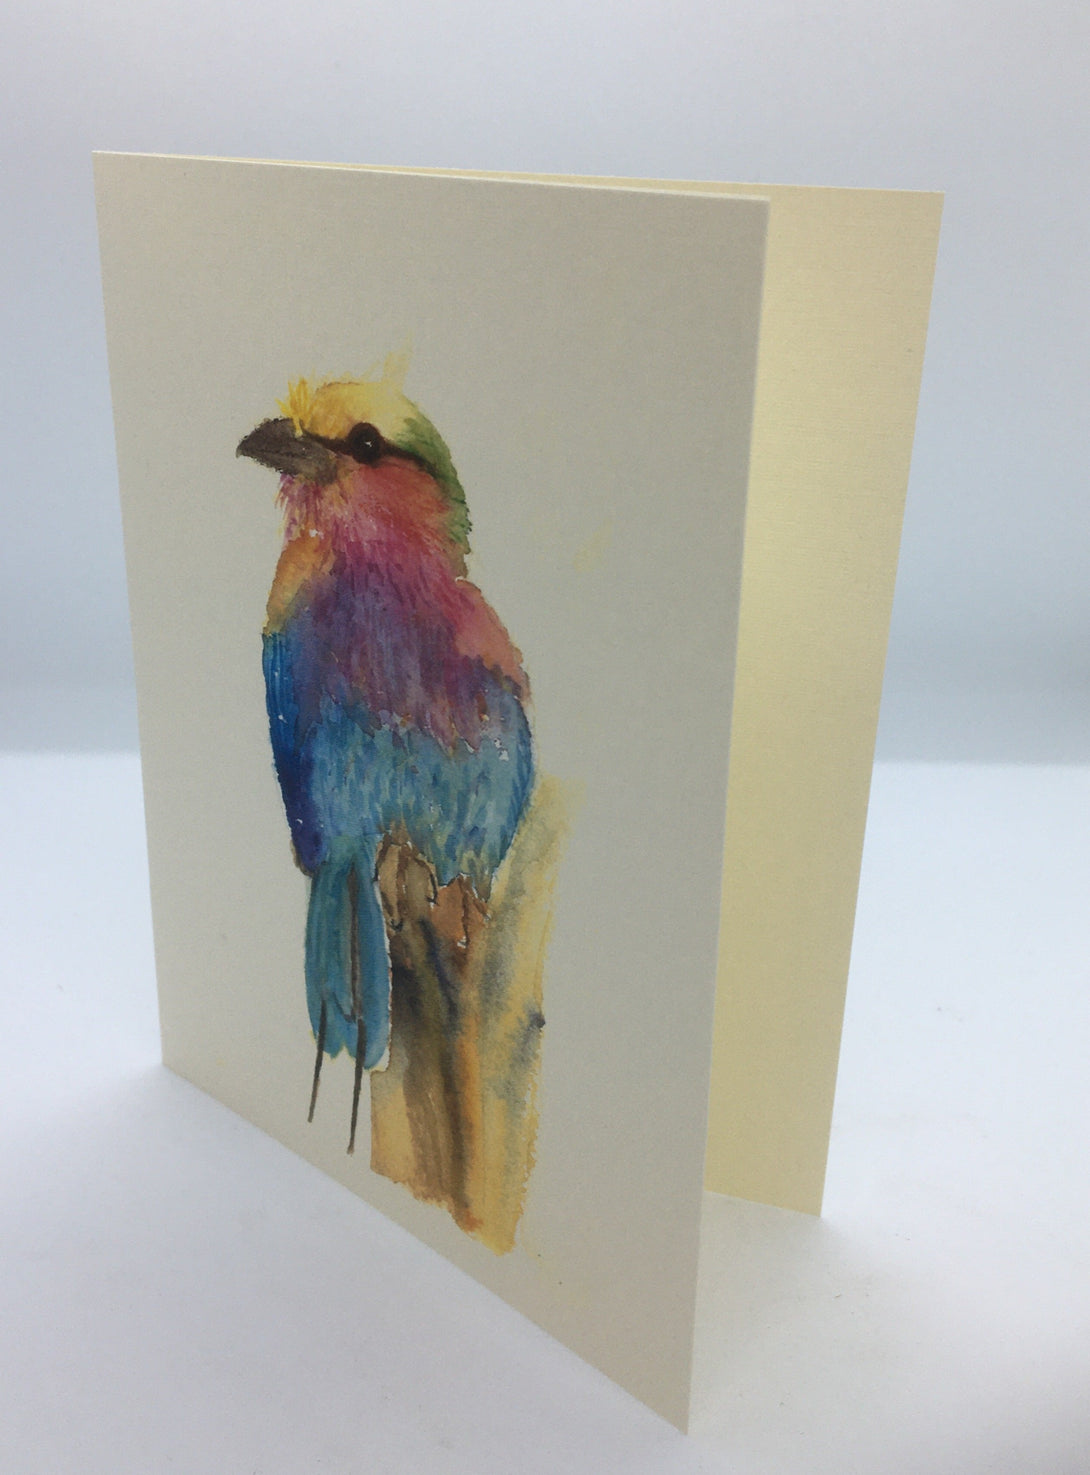 Pam Vest - Card -Lilac Breasted Roller by Pam Vest - McMillan Arts Centre - Vancouver Island Art Gallery